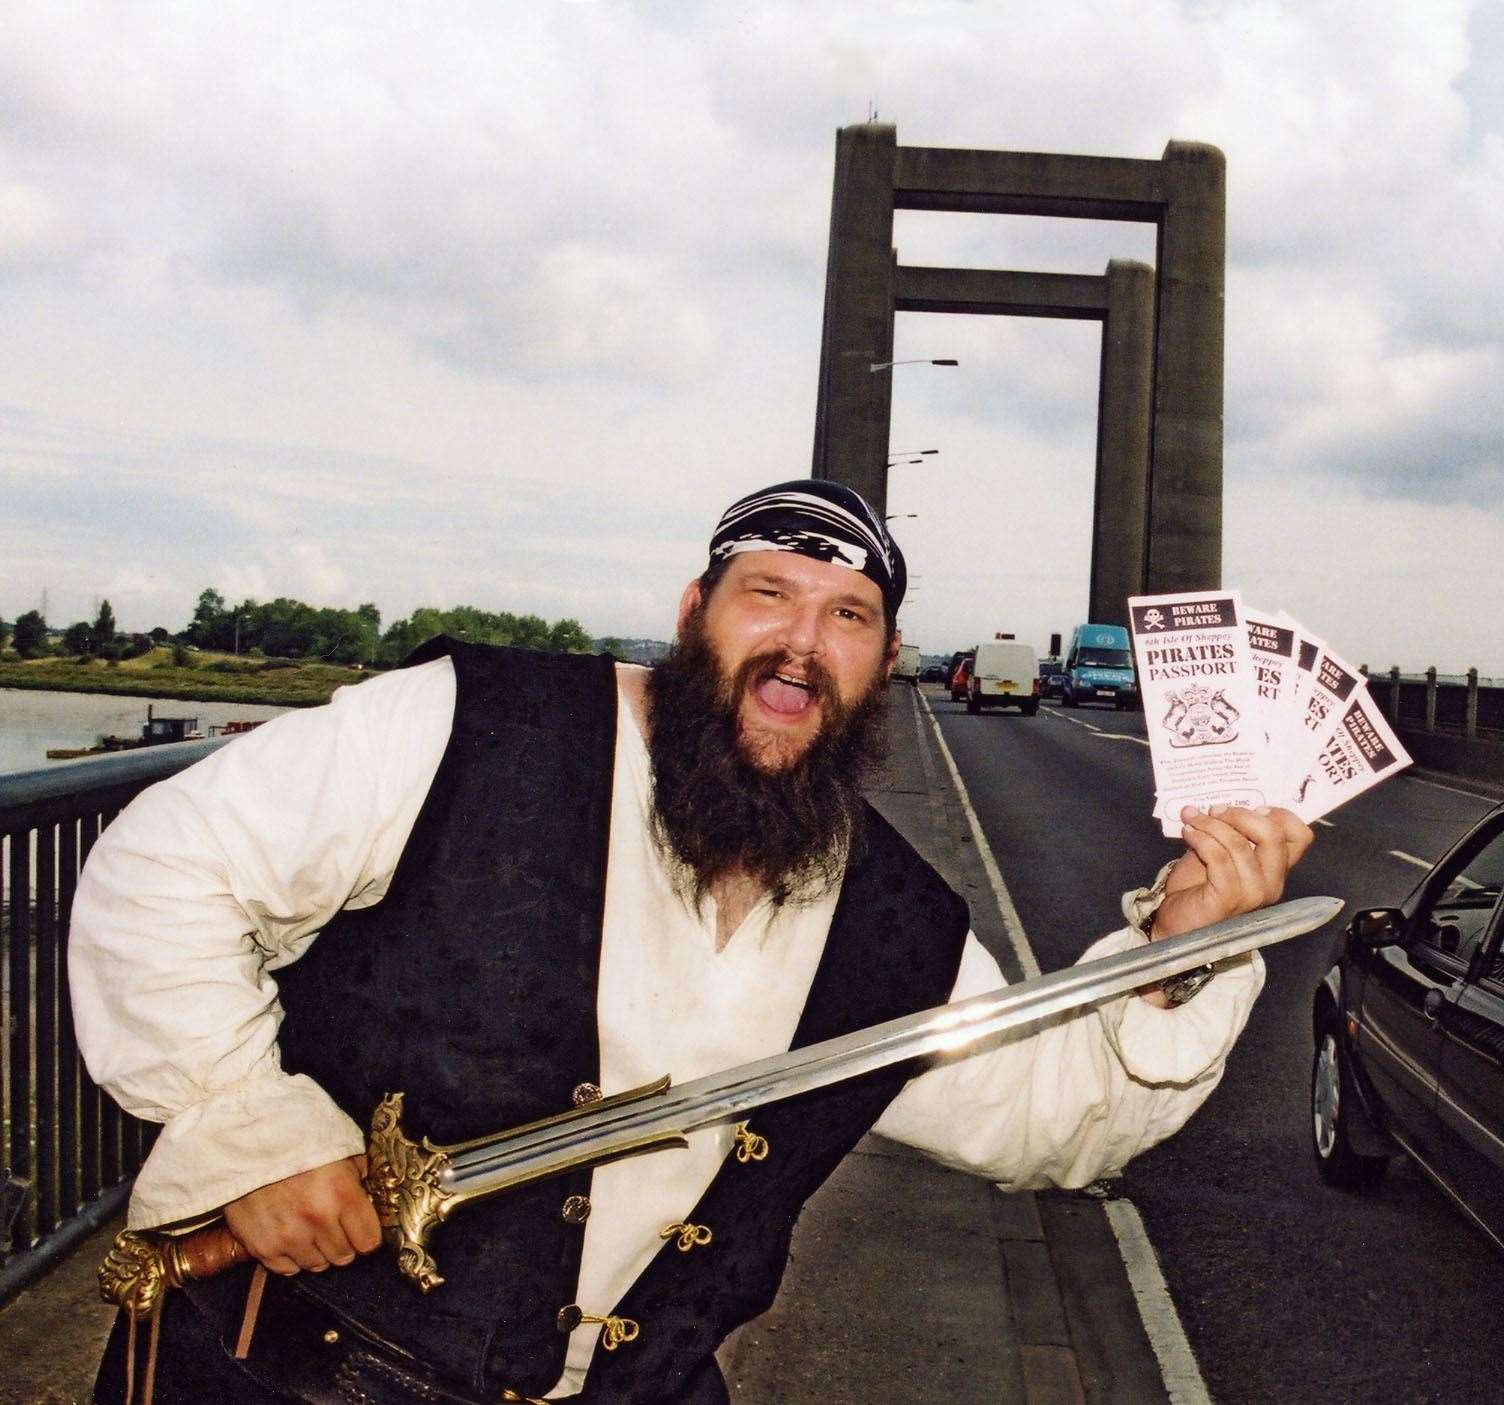 Captain Cutlass of the Sheppey Pirates giving out 'passports' for the World Walking The Plank championships at the Kingsferry Bridge